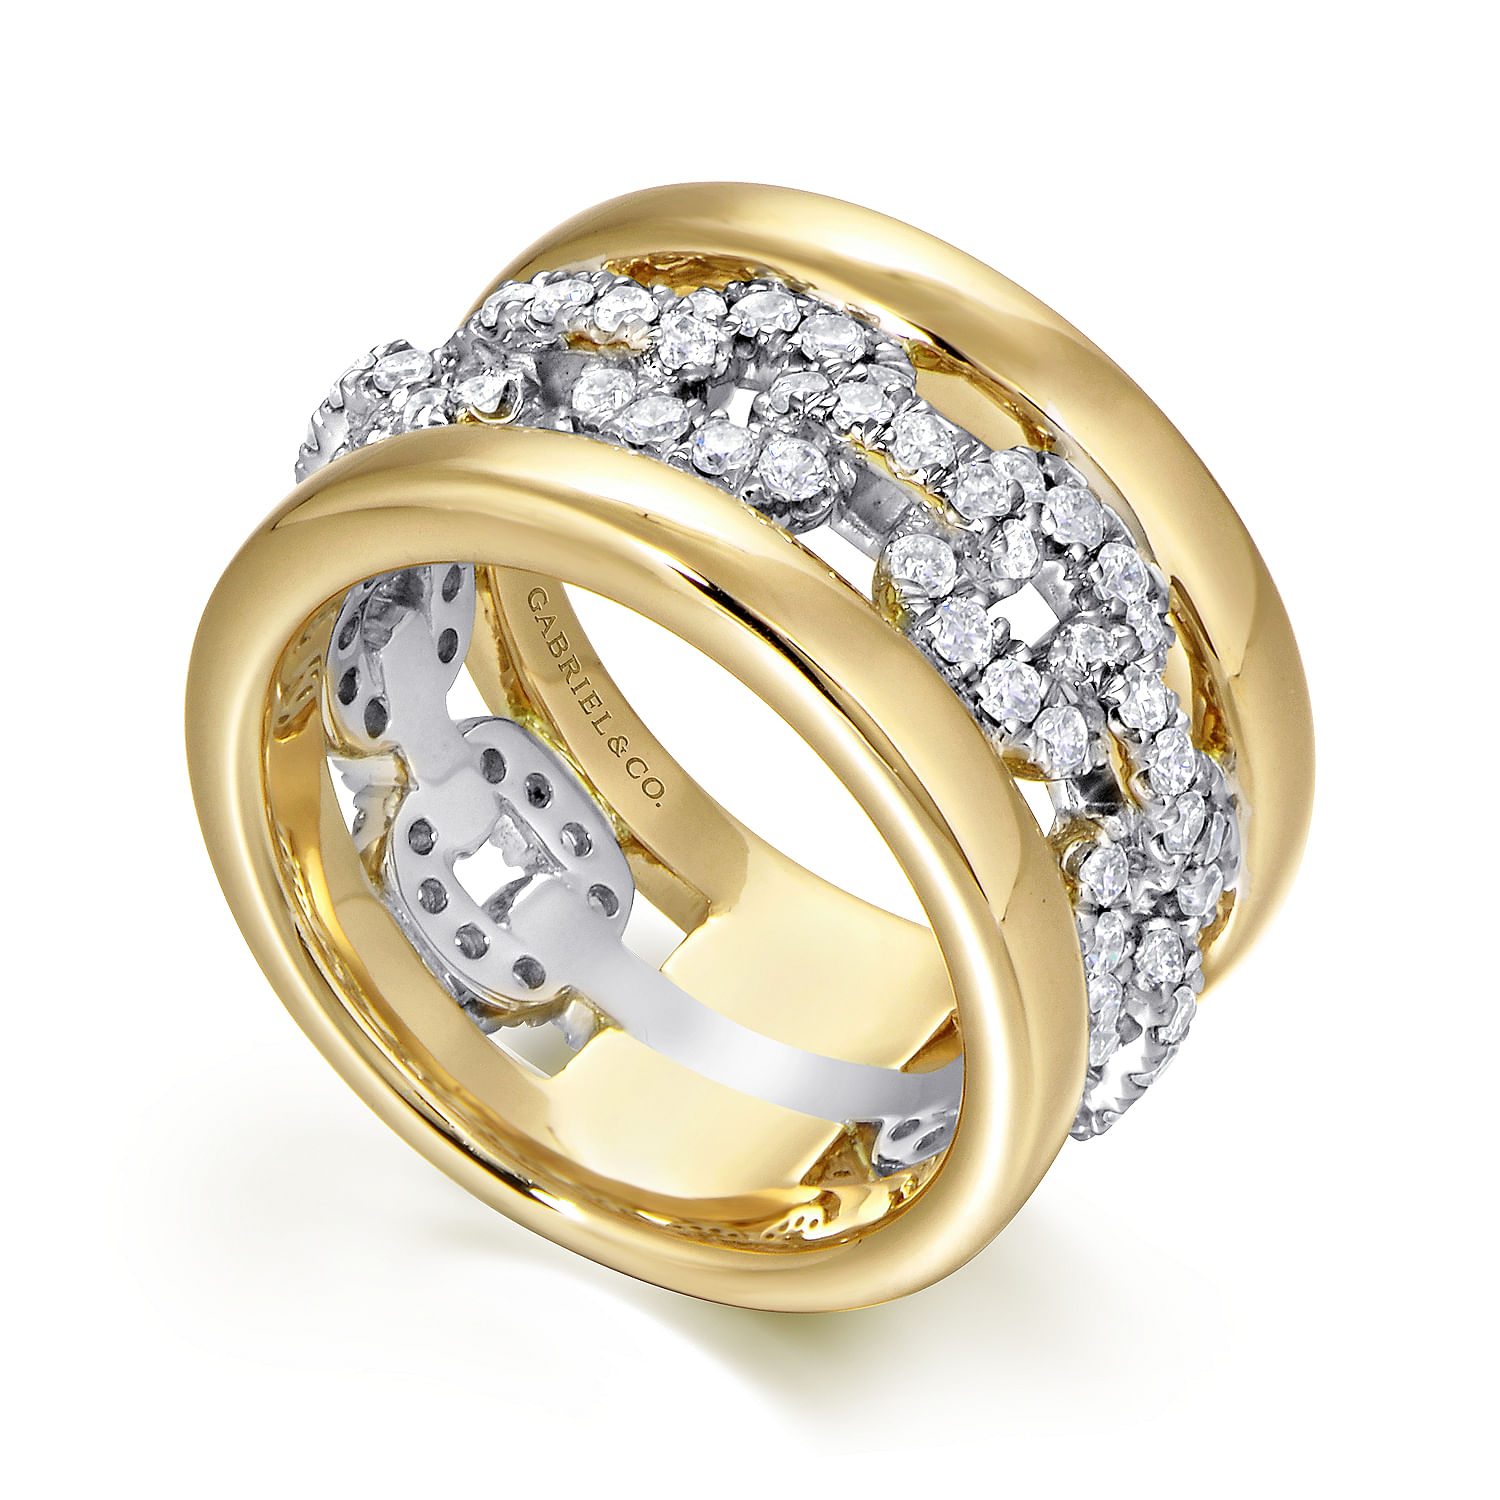 Wide 14K White and Yellow Gold Fancy Diamond Anniversary Band